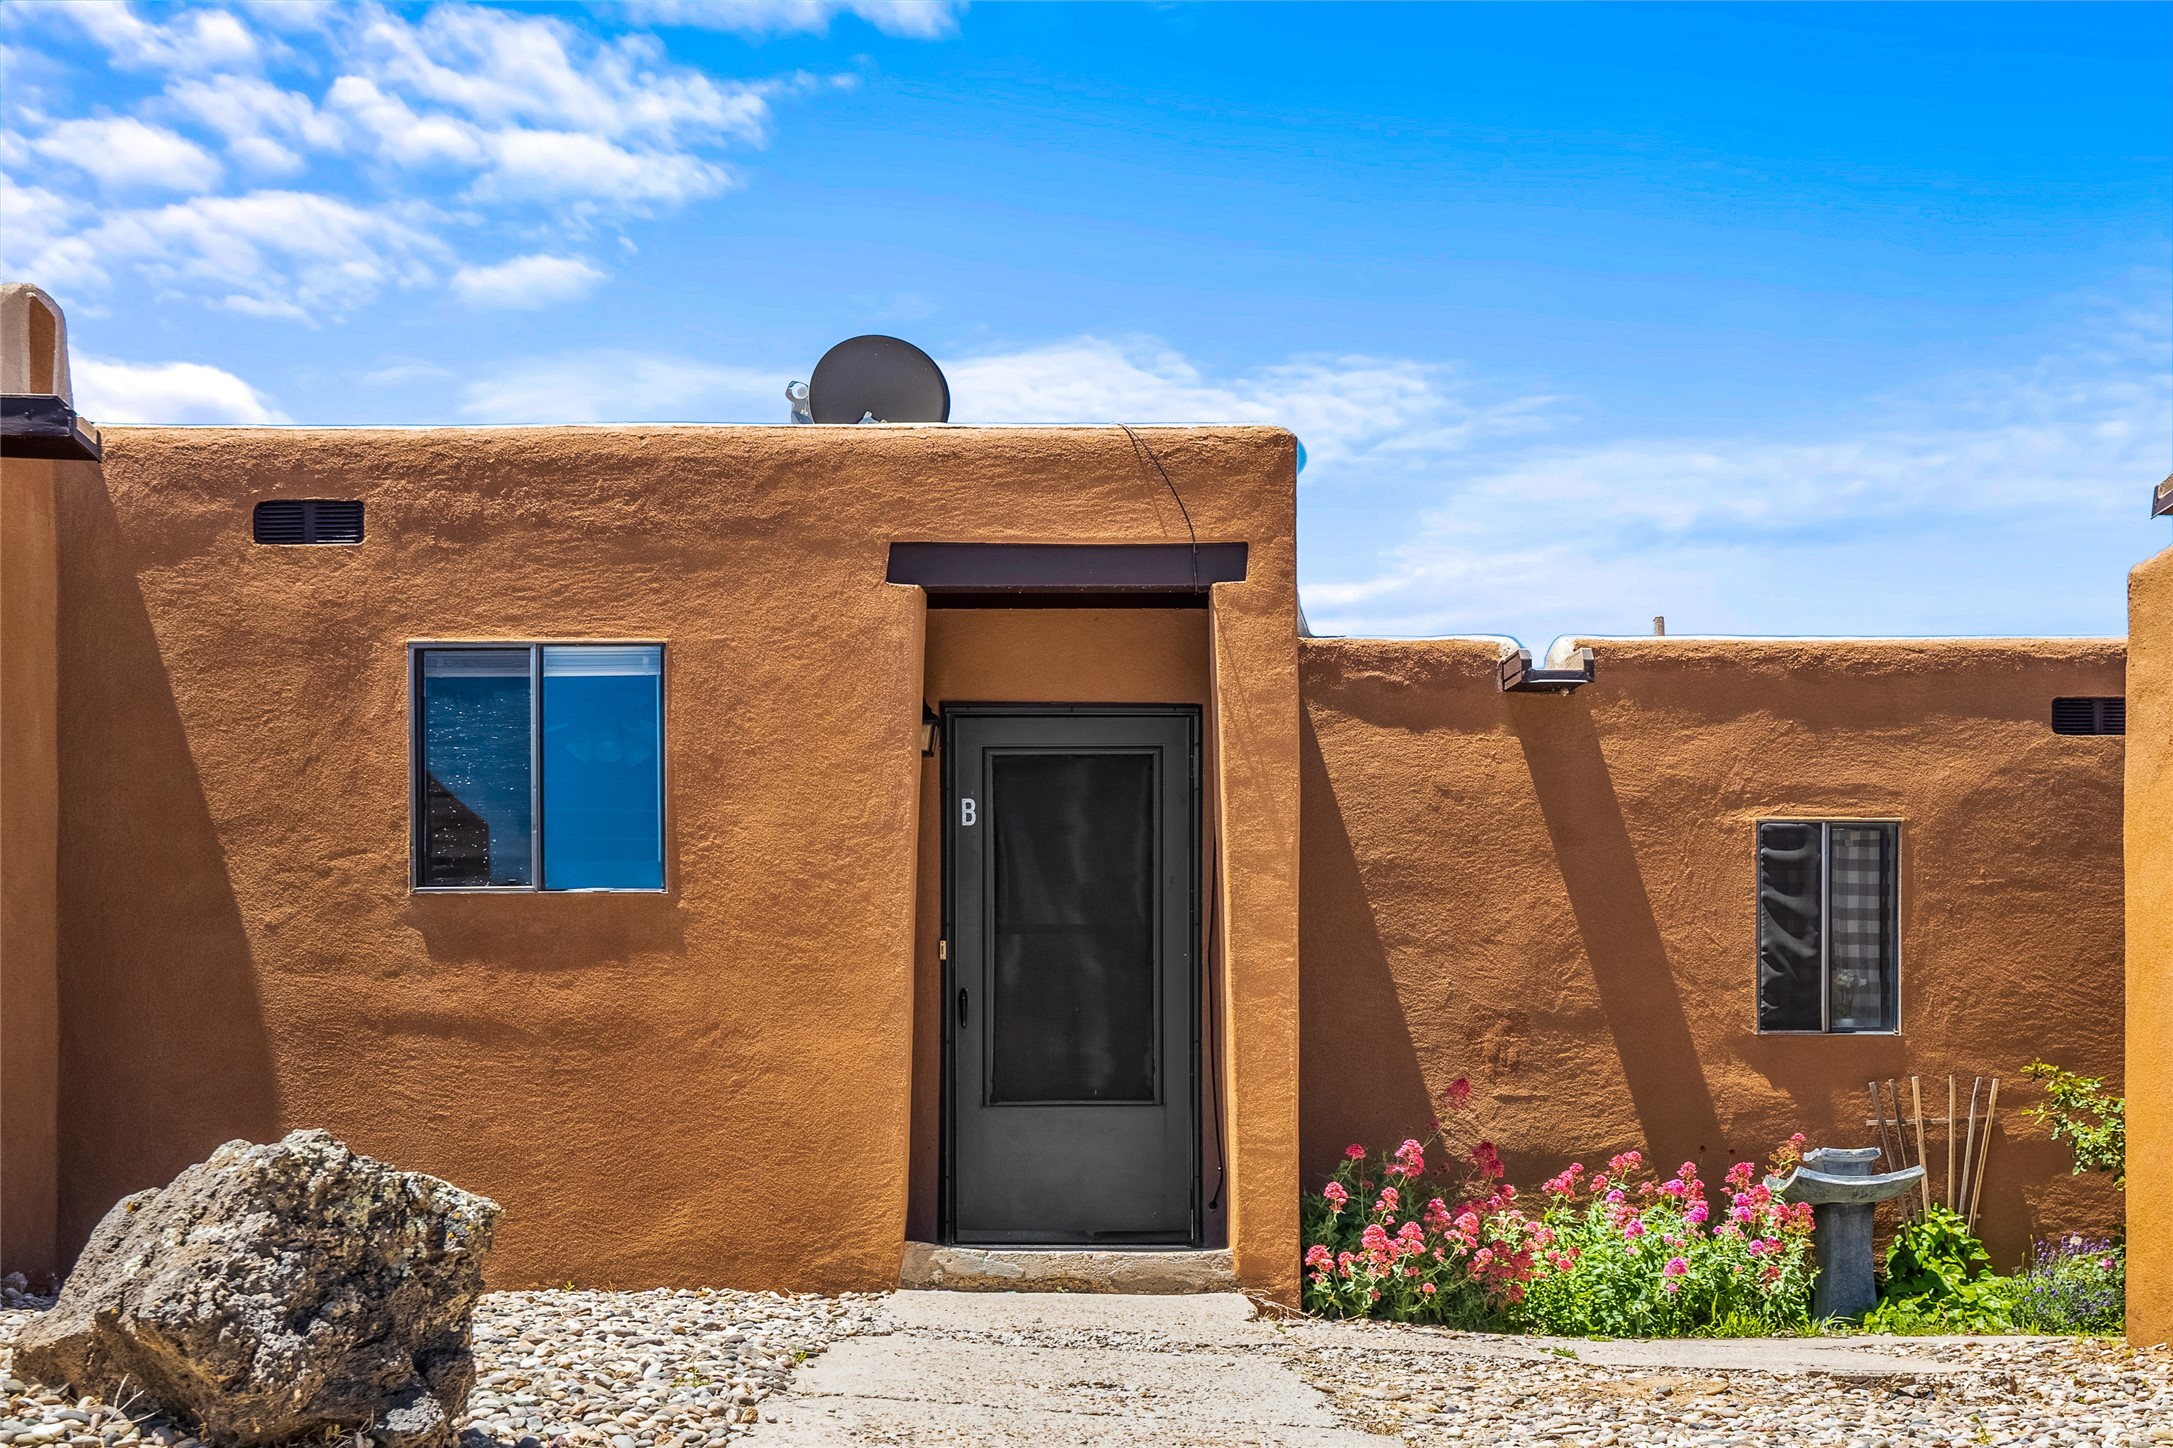 2710 Galisteo Court, Santa Fe, New Mexico 87505, 5 Bedrooms Bedrooms, ,5 BathroomsBathrooms,Residential,For Sale,2710 Galisteo Court,202338108